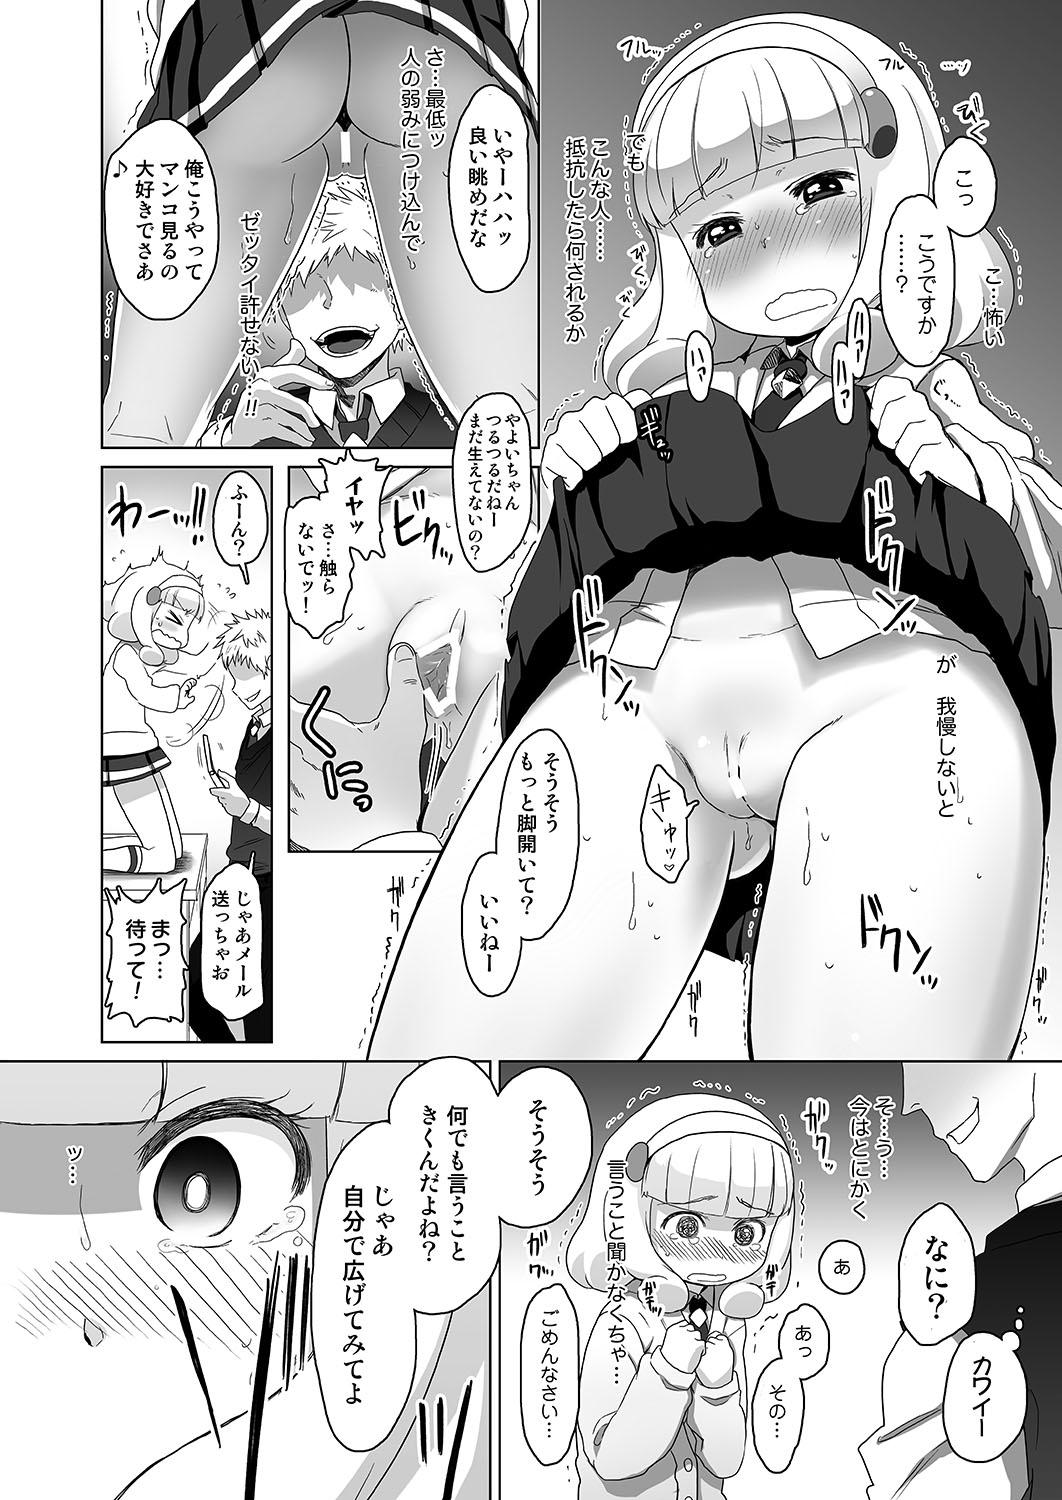 Cam SMILE FOR YOU 1 - Smile precure Heels - Page 5